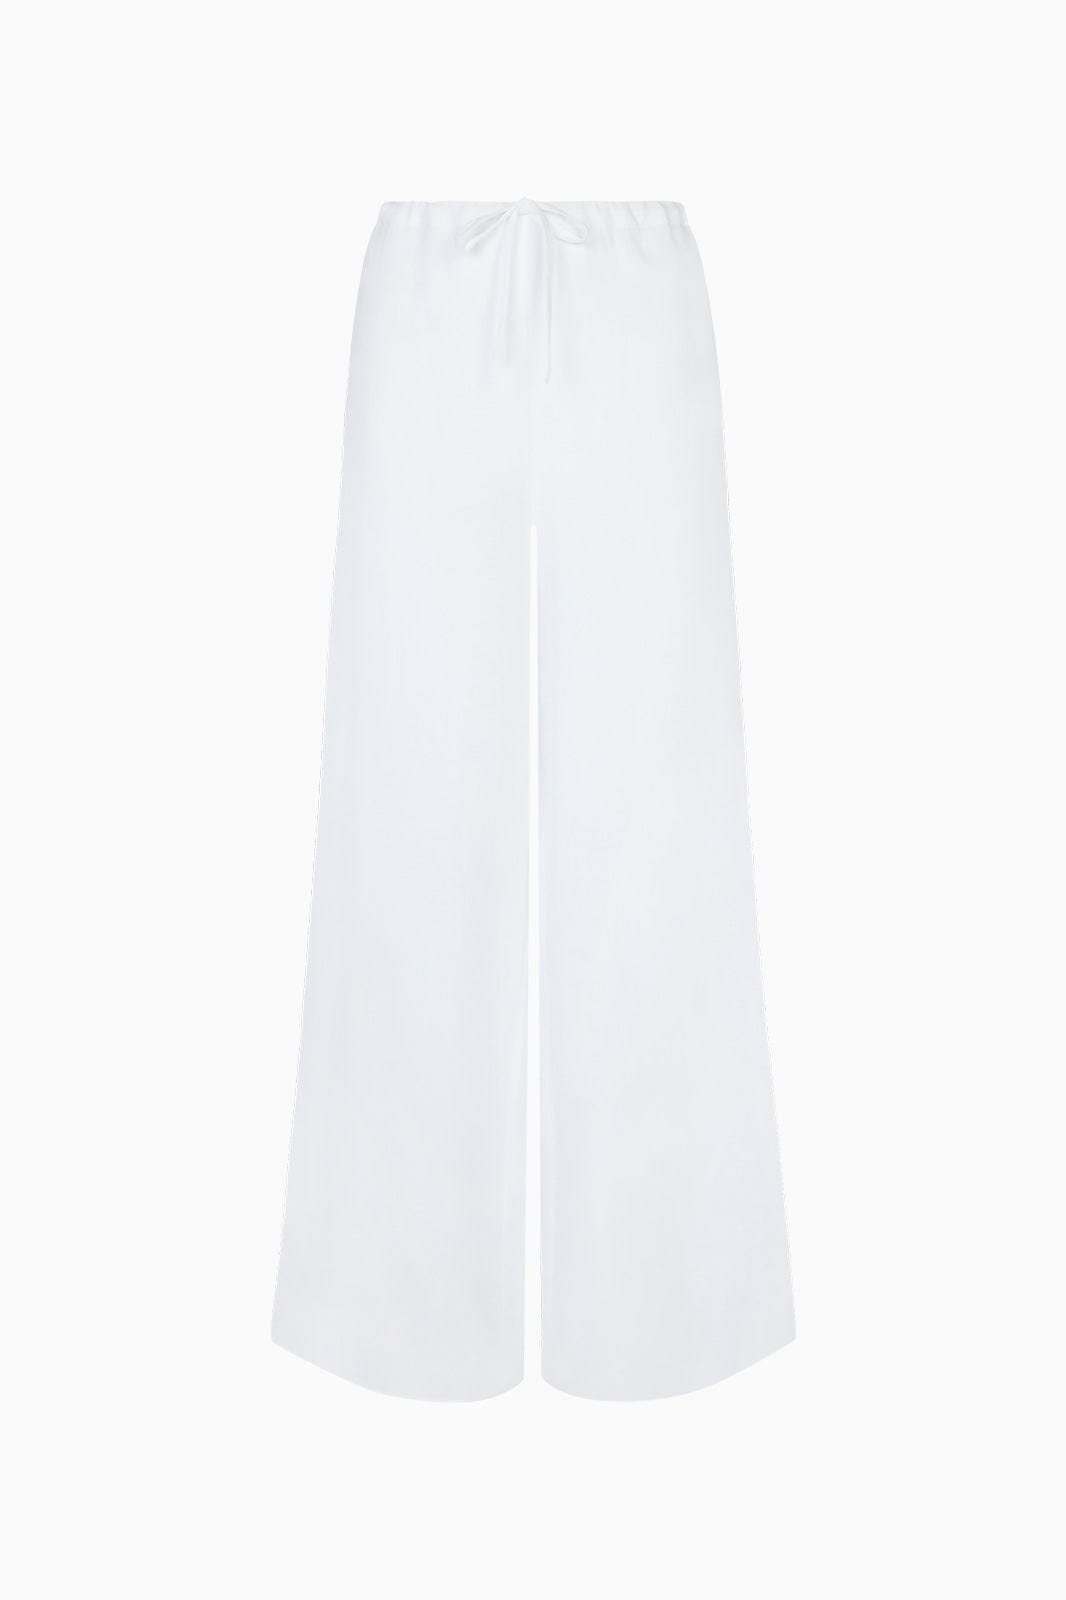 arkitaip Trousers The Marta Drawstring Trousers in white - Sample